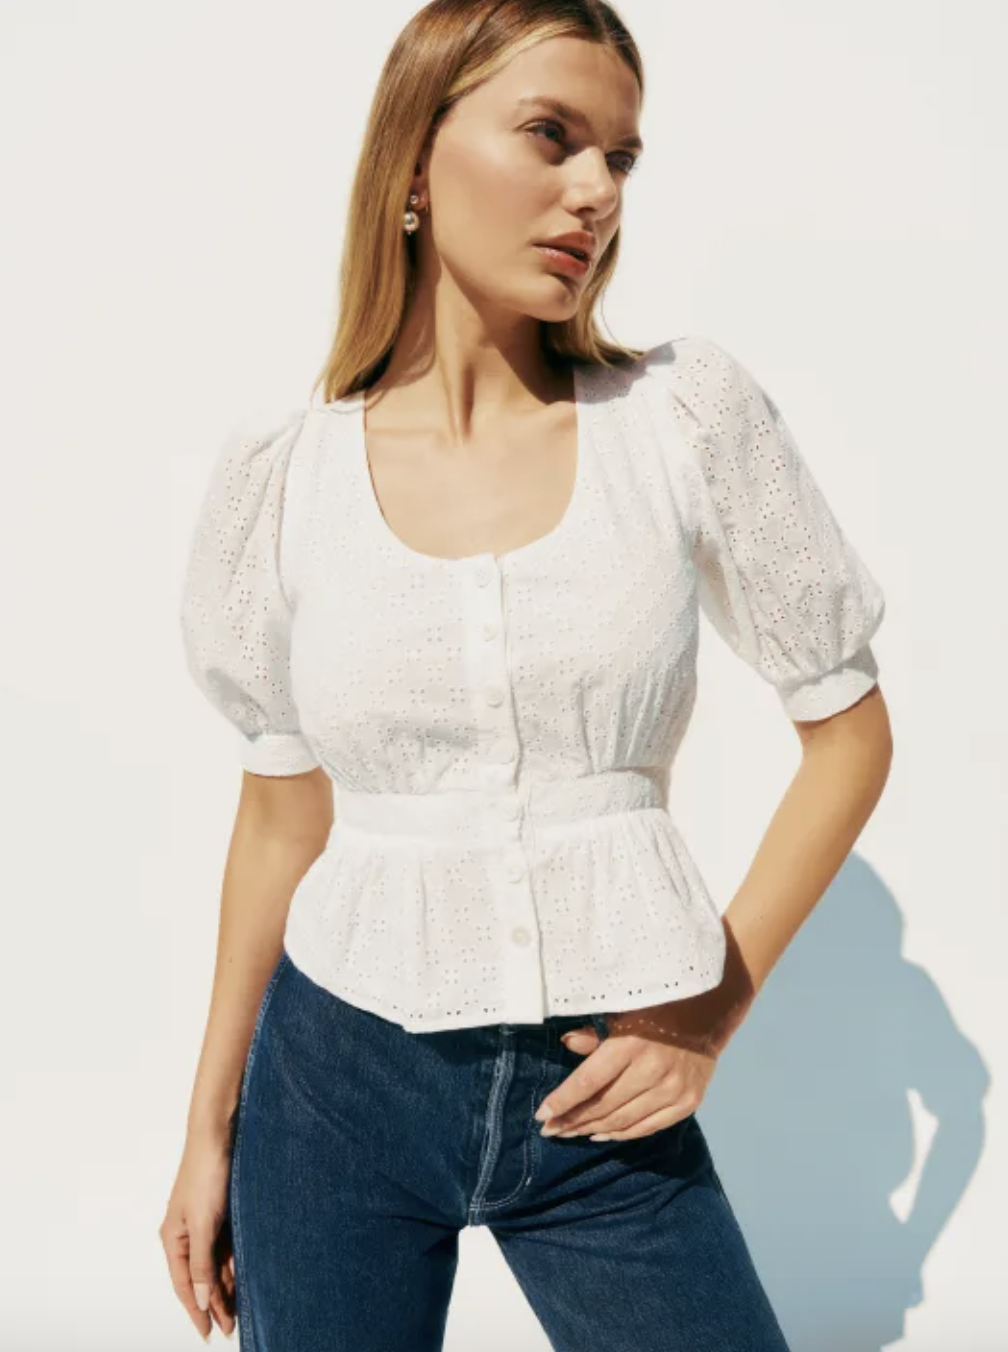 The 35 Cutest Peplum Tops to Wear in 2022 | Who What Wear